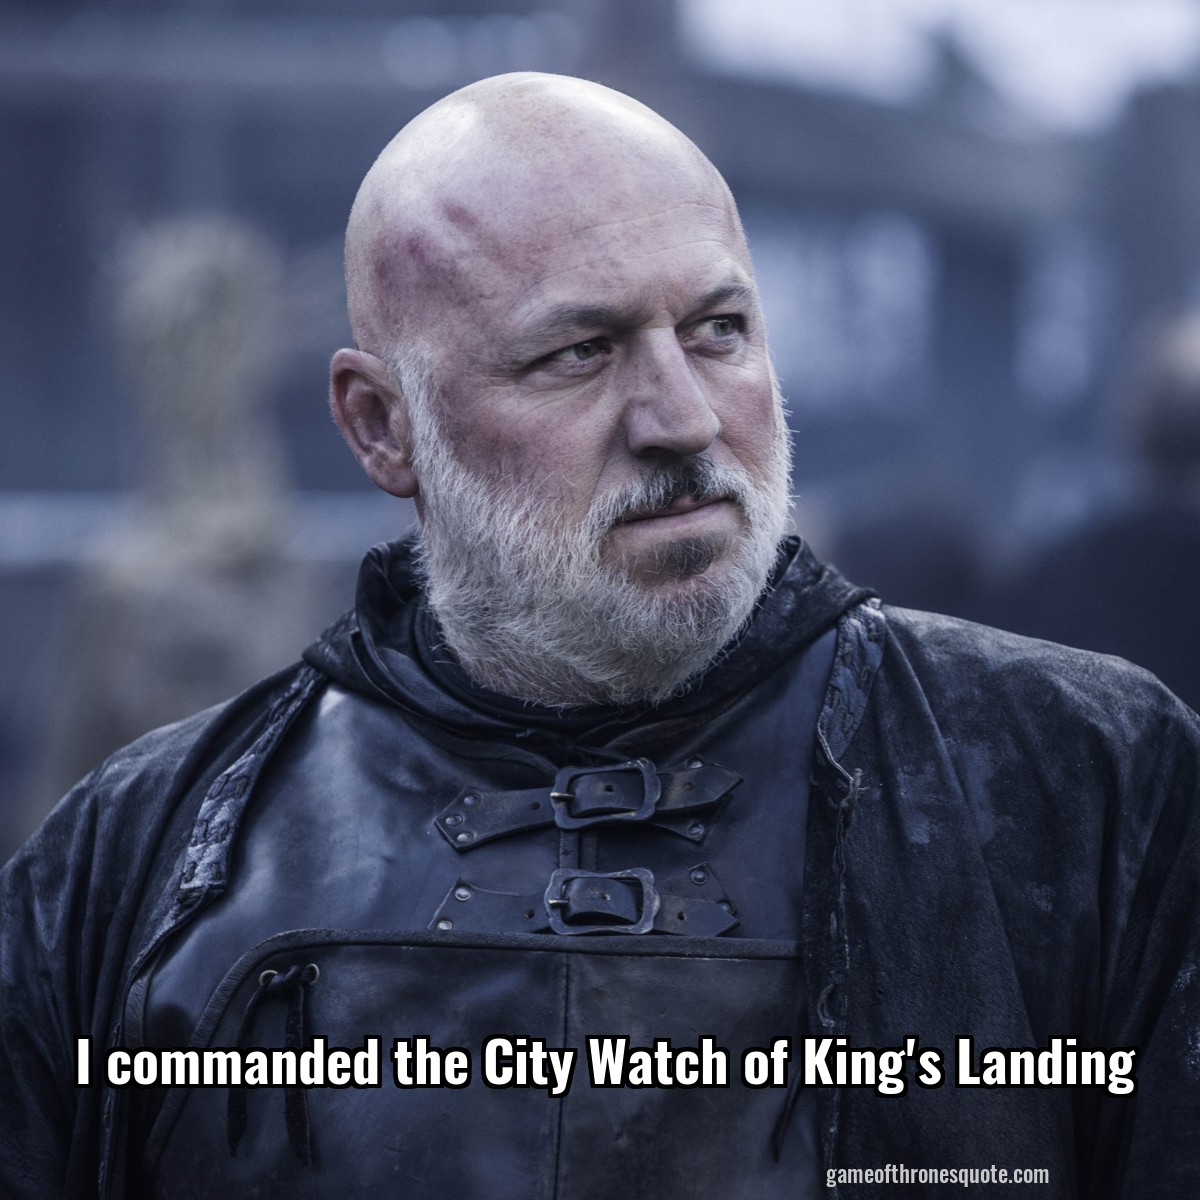 I commanded the City Watch of King's Landing